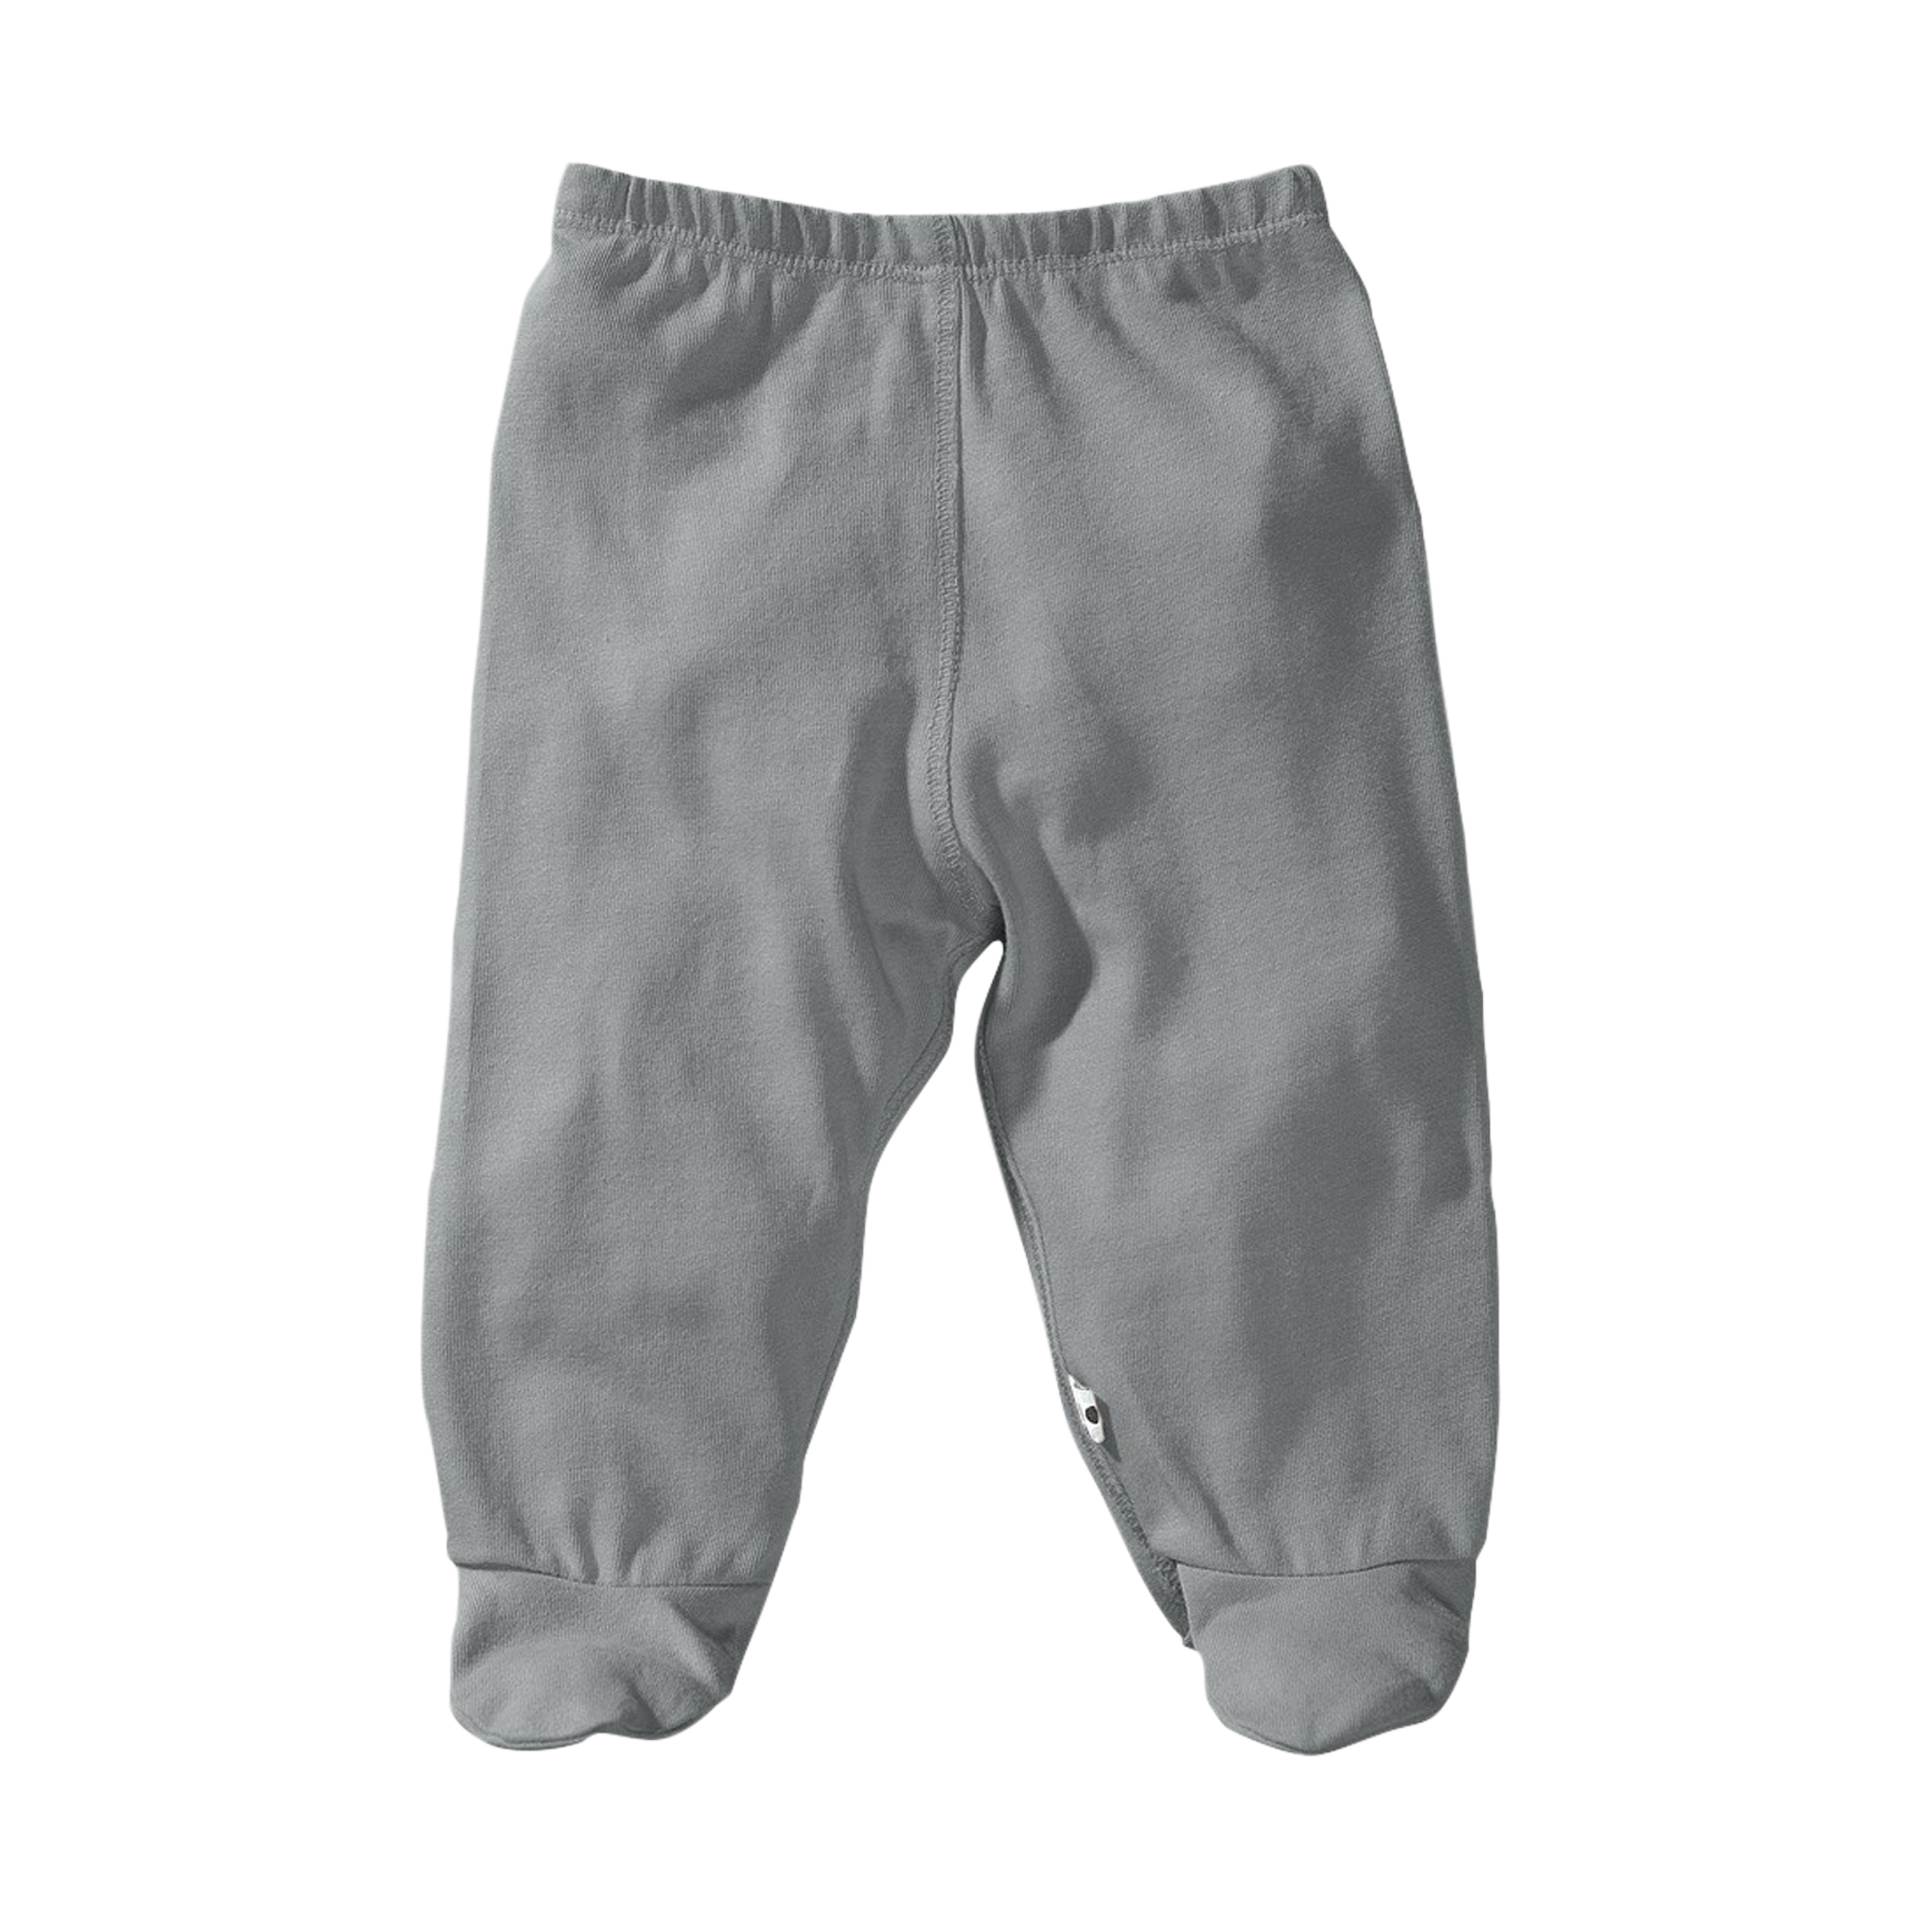 Buy Newborn Footed Pants Online In India  Etsy India